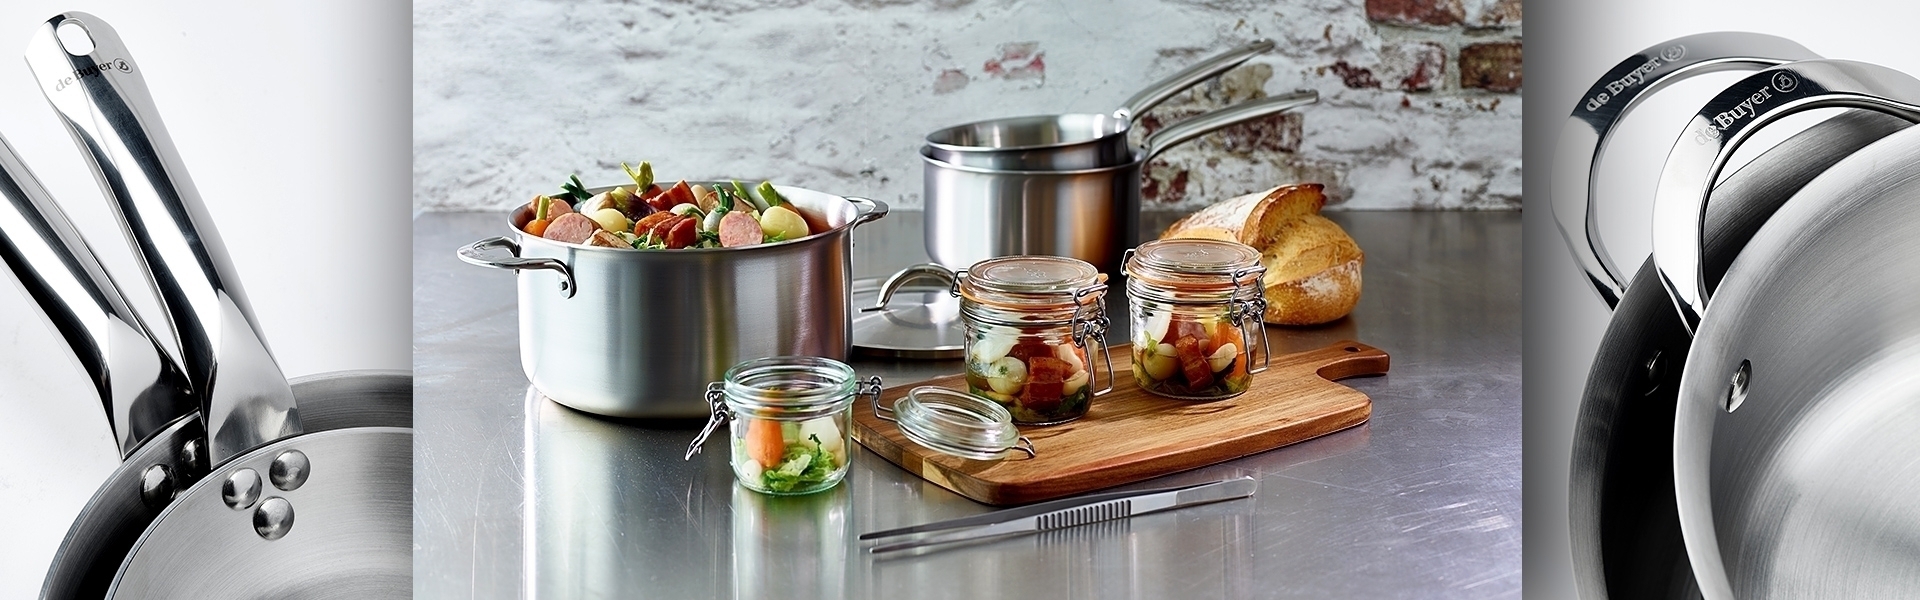 CRISTEL 3-Ply Stainless Steel Saucepan Set (14, 16, 18 and 20cm) with 3 x  Flat Glass Lids and 2 x Detachable Handles